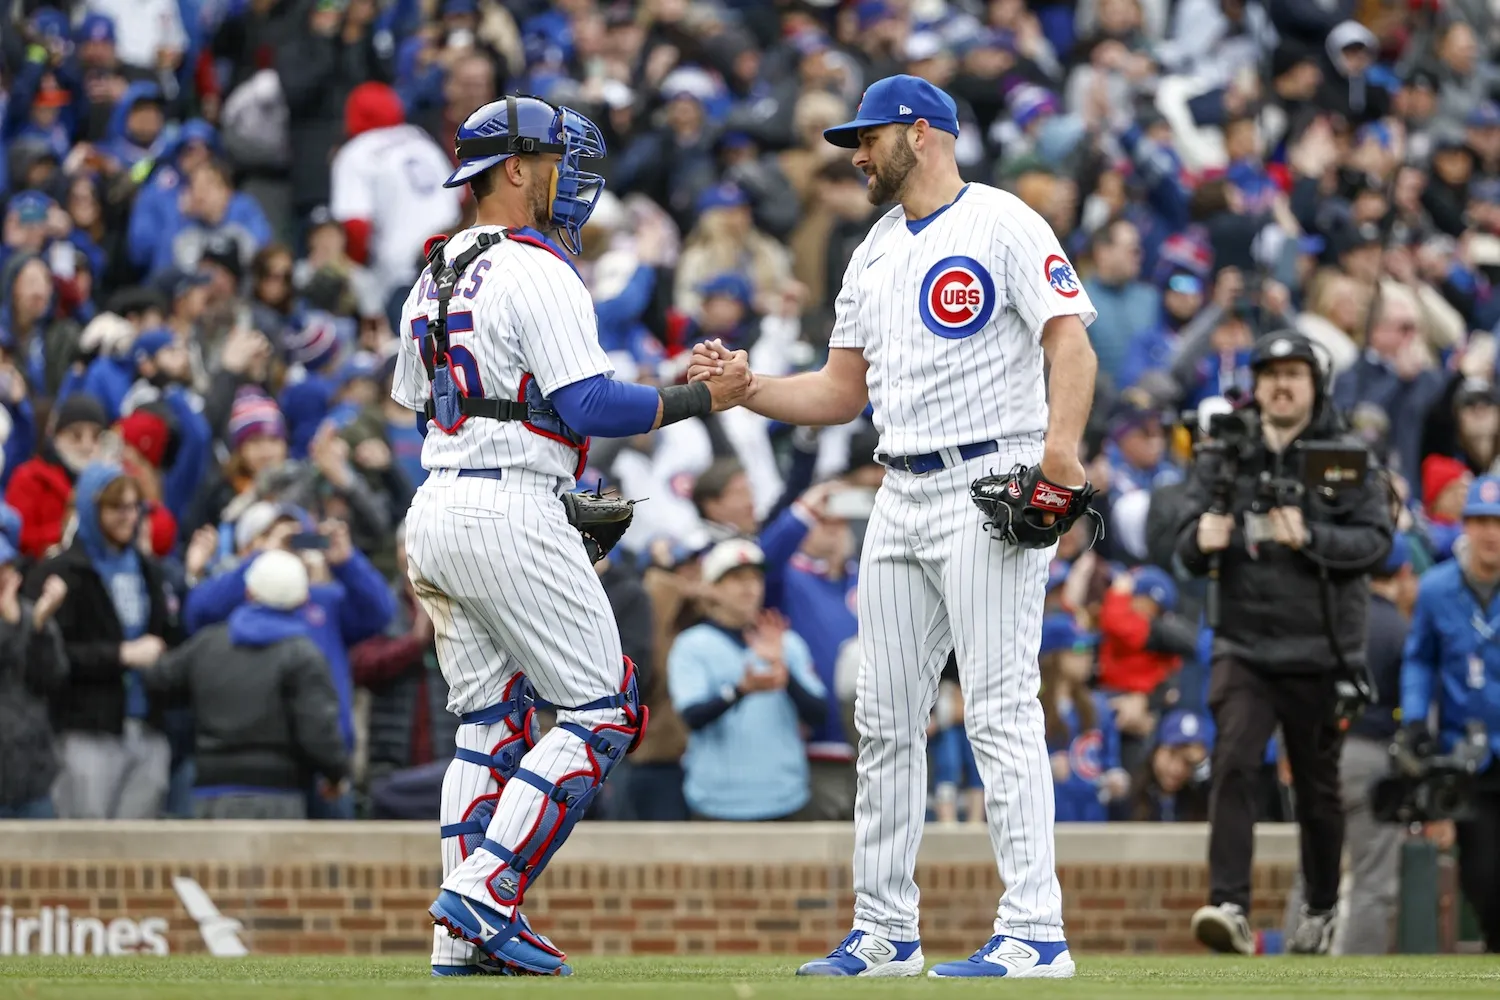 Mar 30, 2023; Chicago, Illinois, USA; Chicago Cubs relief pitcher Michael Fulmer (32) celebrates with catcher Yan Gomes (15) team's win against the Milwaukee Brewers at Wrigley Field. Mandatory Credit: Kamil Krzaczynski-USA TODAY Sports